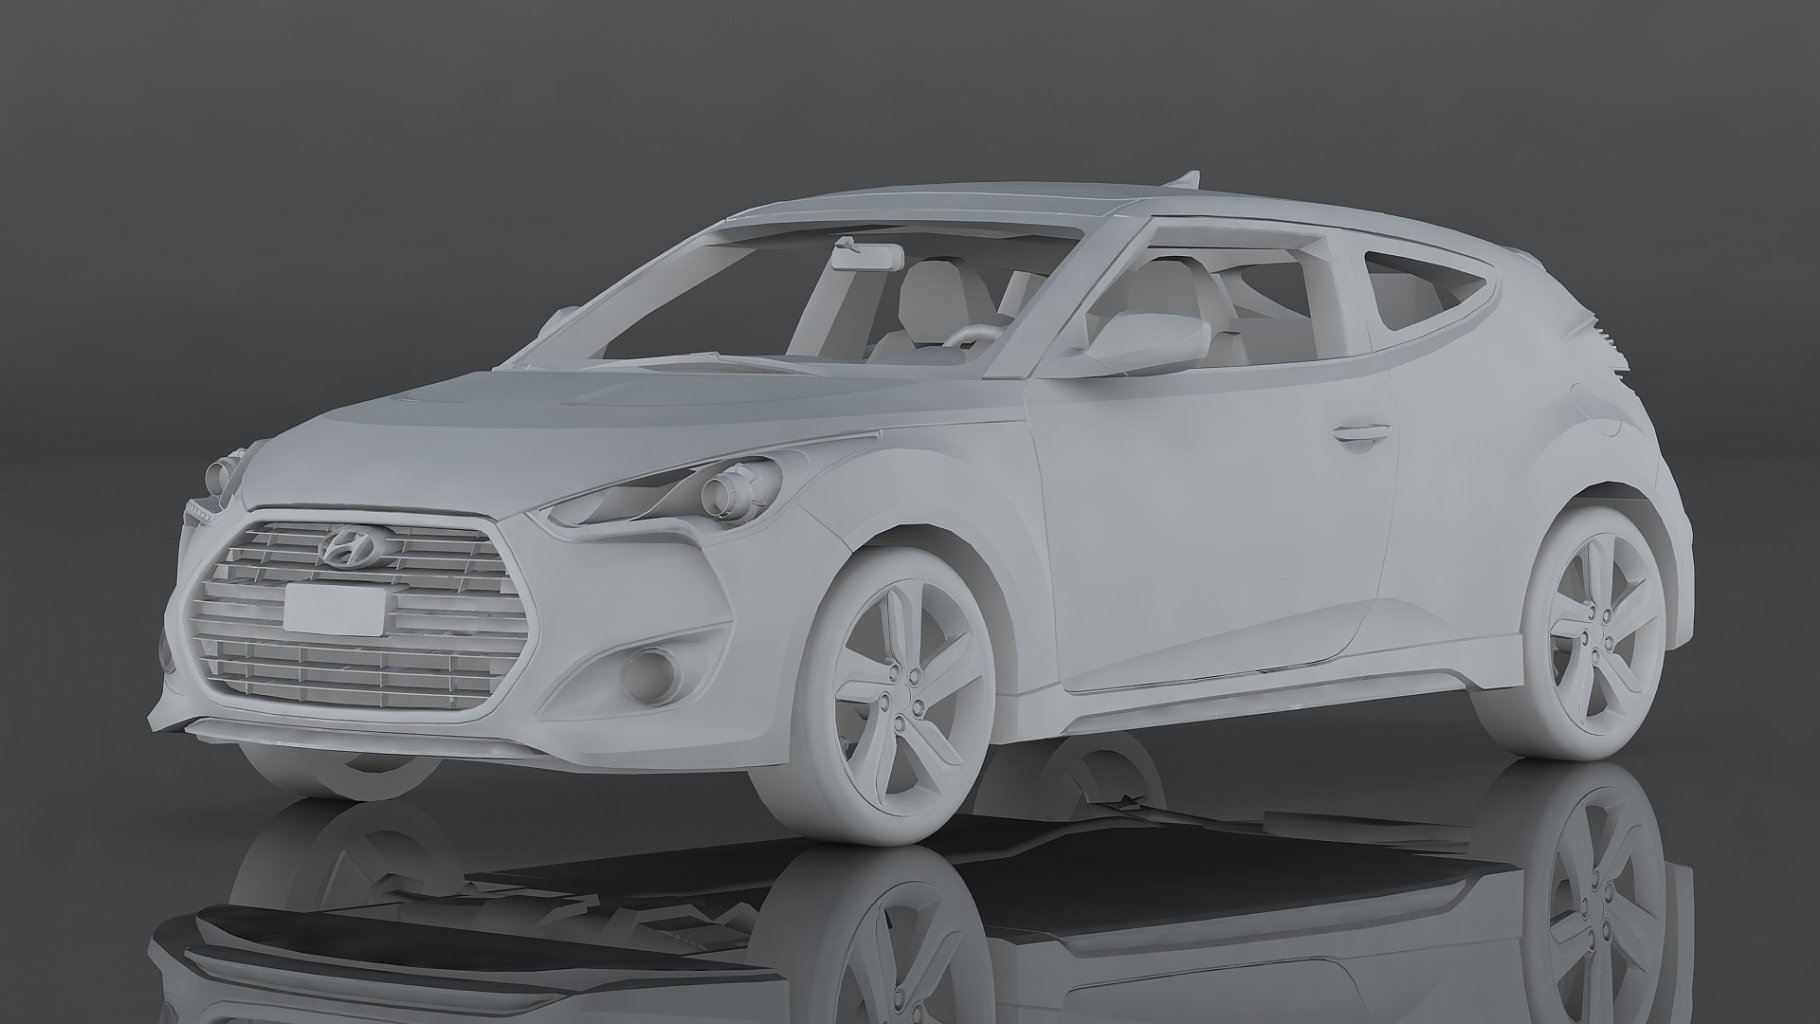 Hyundai veloster gray mockup in the right side.